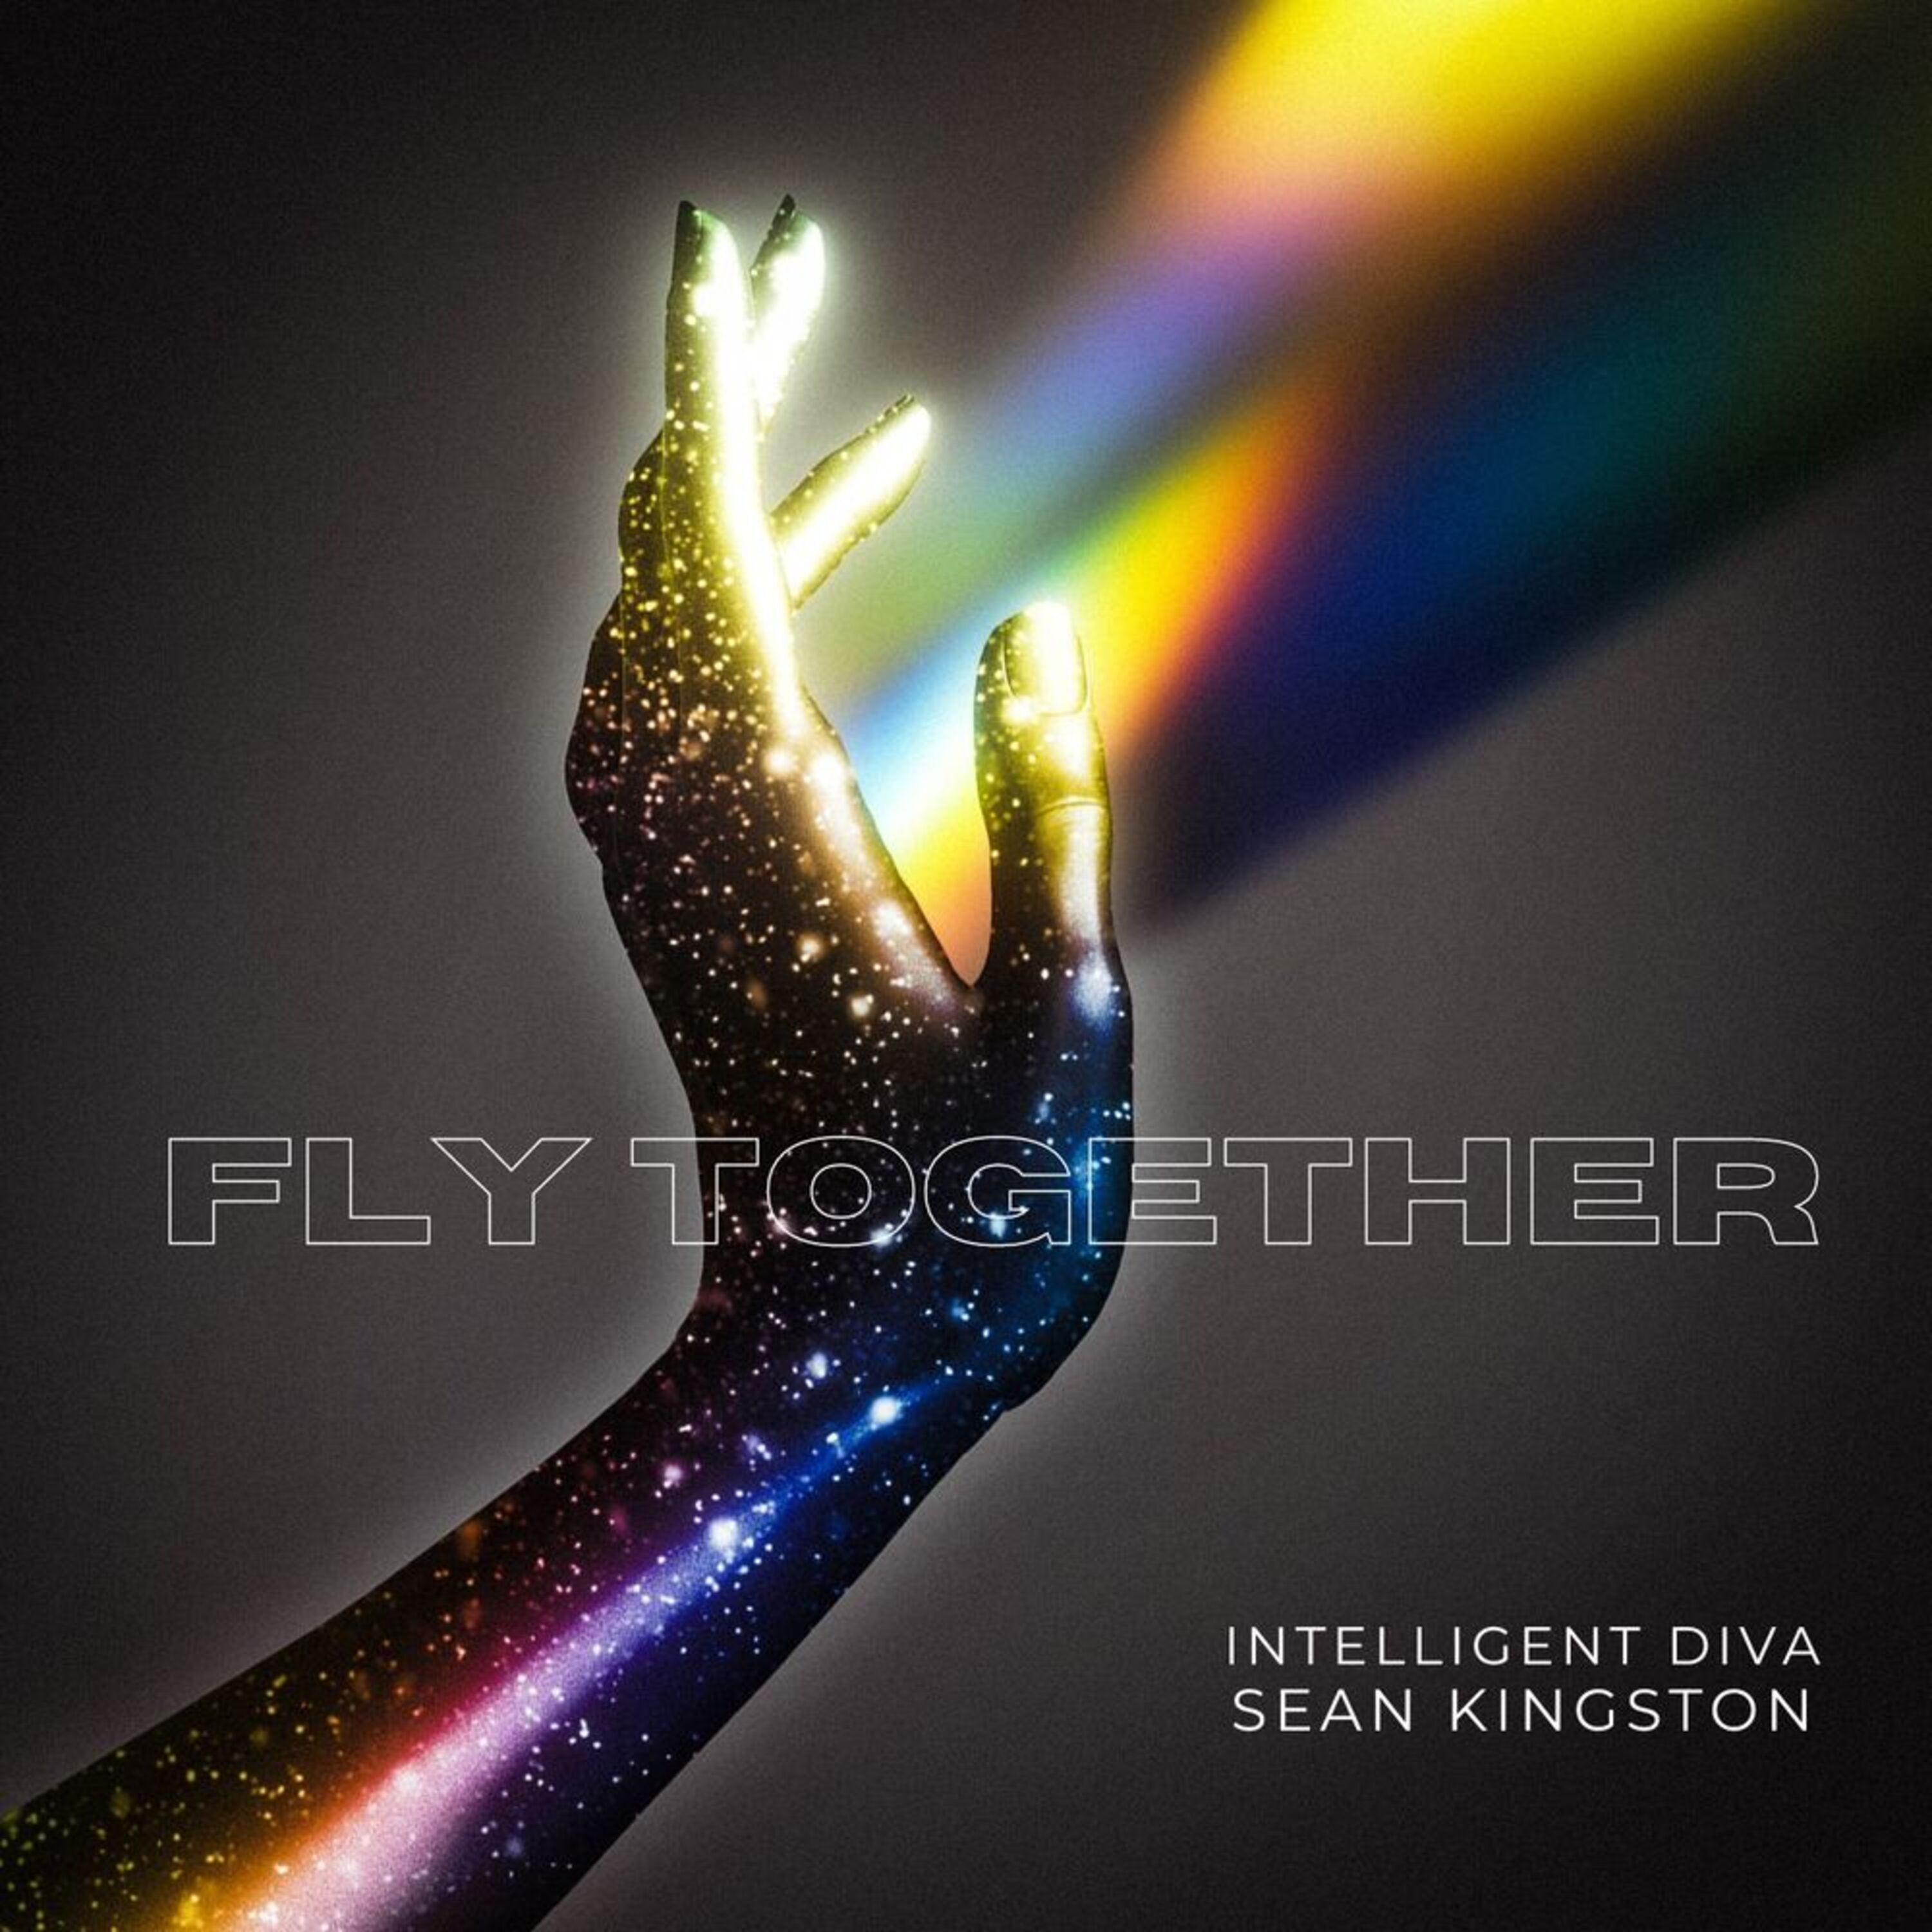 The new single ‘Fly Together’ from ‘Intelligent Diva’ Feat ‘Sean Kingston’ with its awe-inspiring and catchy production is on the playlist.